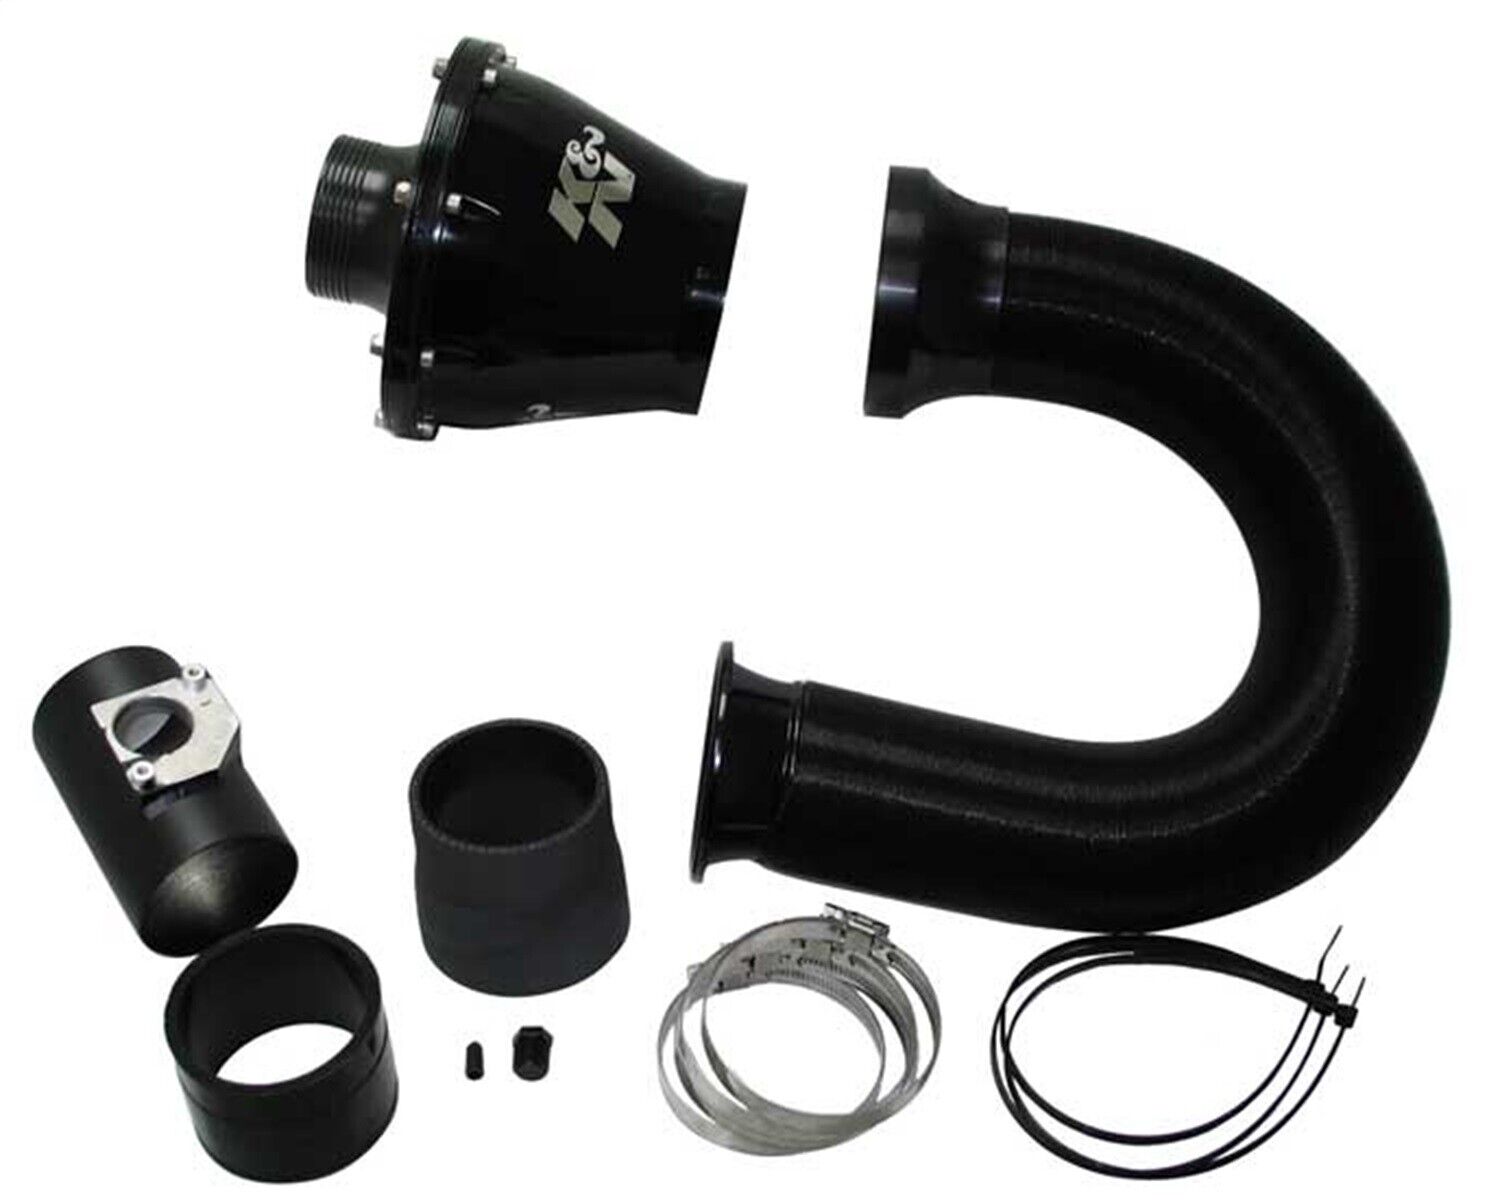 K&N Filters 57A-6034 Apollo Cold Air Intake System Fits 03-08 Elise Exige